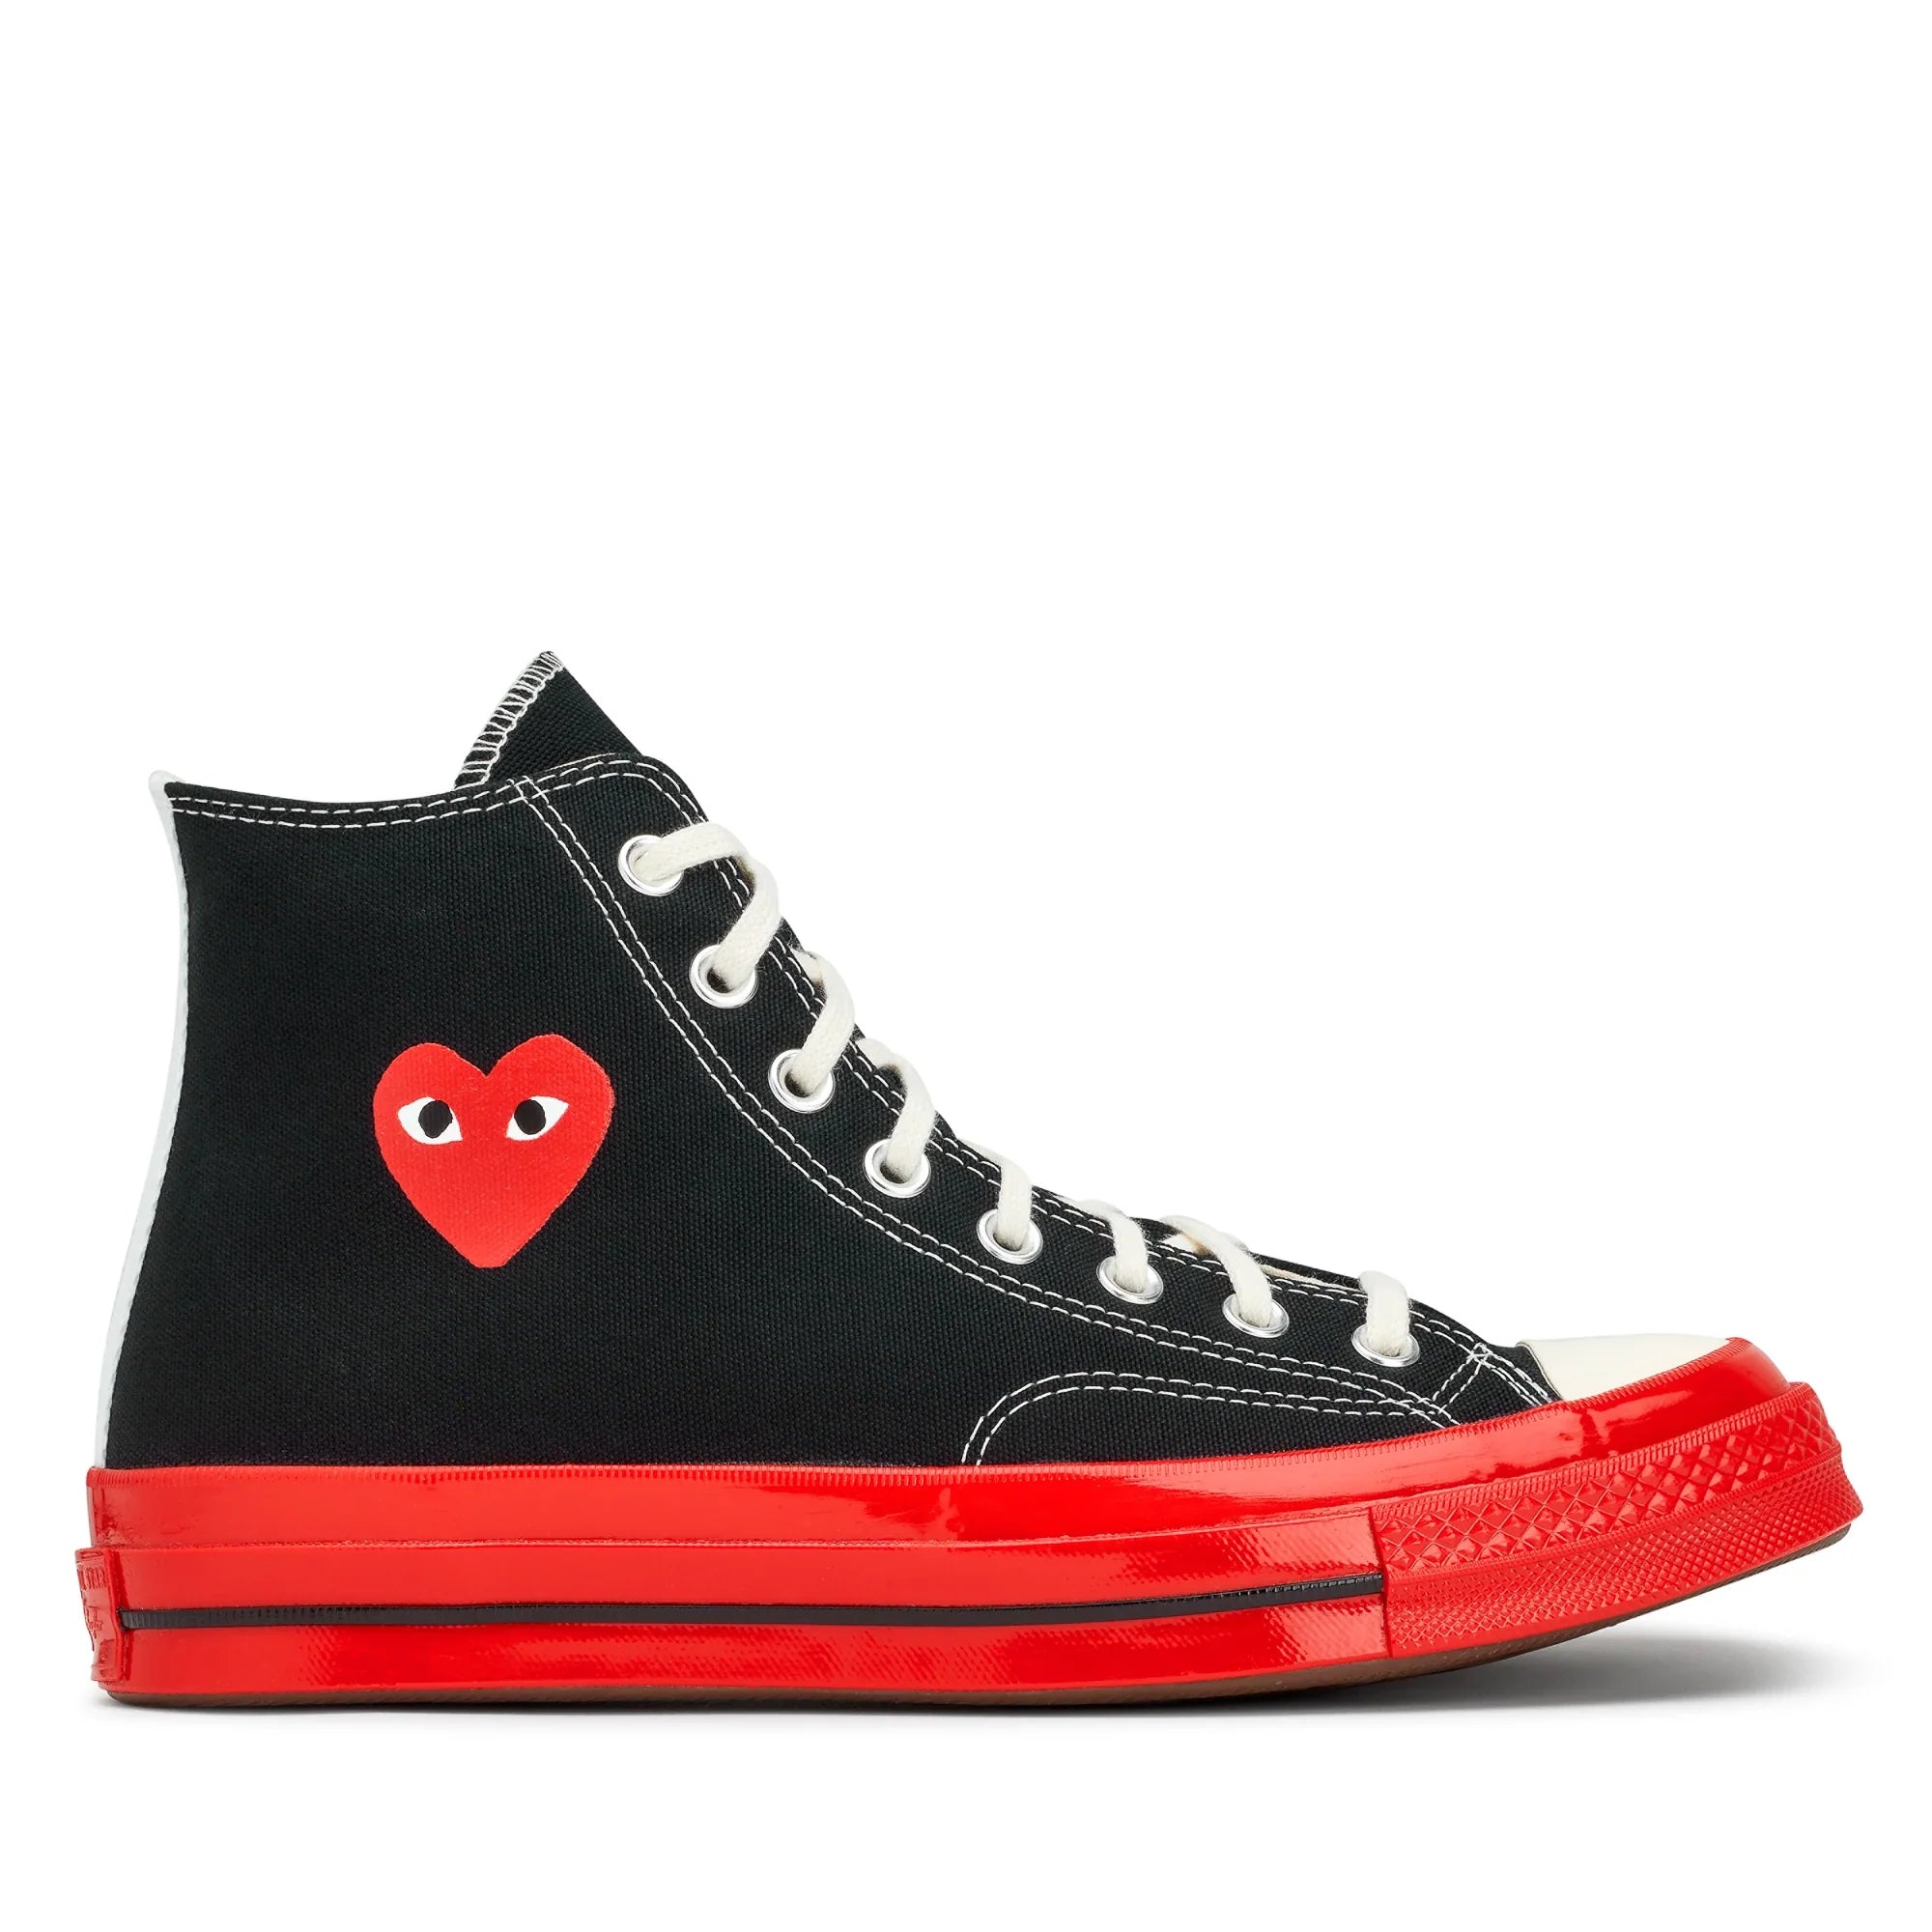 Converse High trainers - Chuck Taylor All Star Malden Street - A01716C -  Online shop for sneakers, shoes and boots